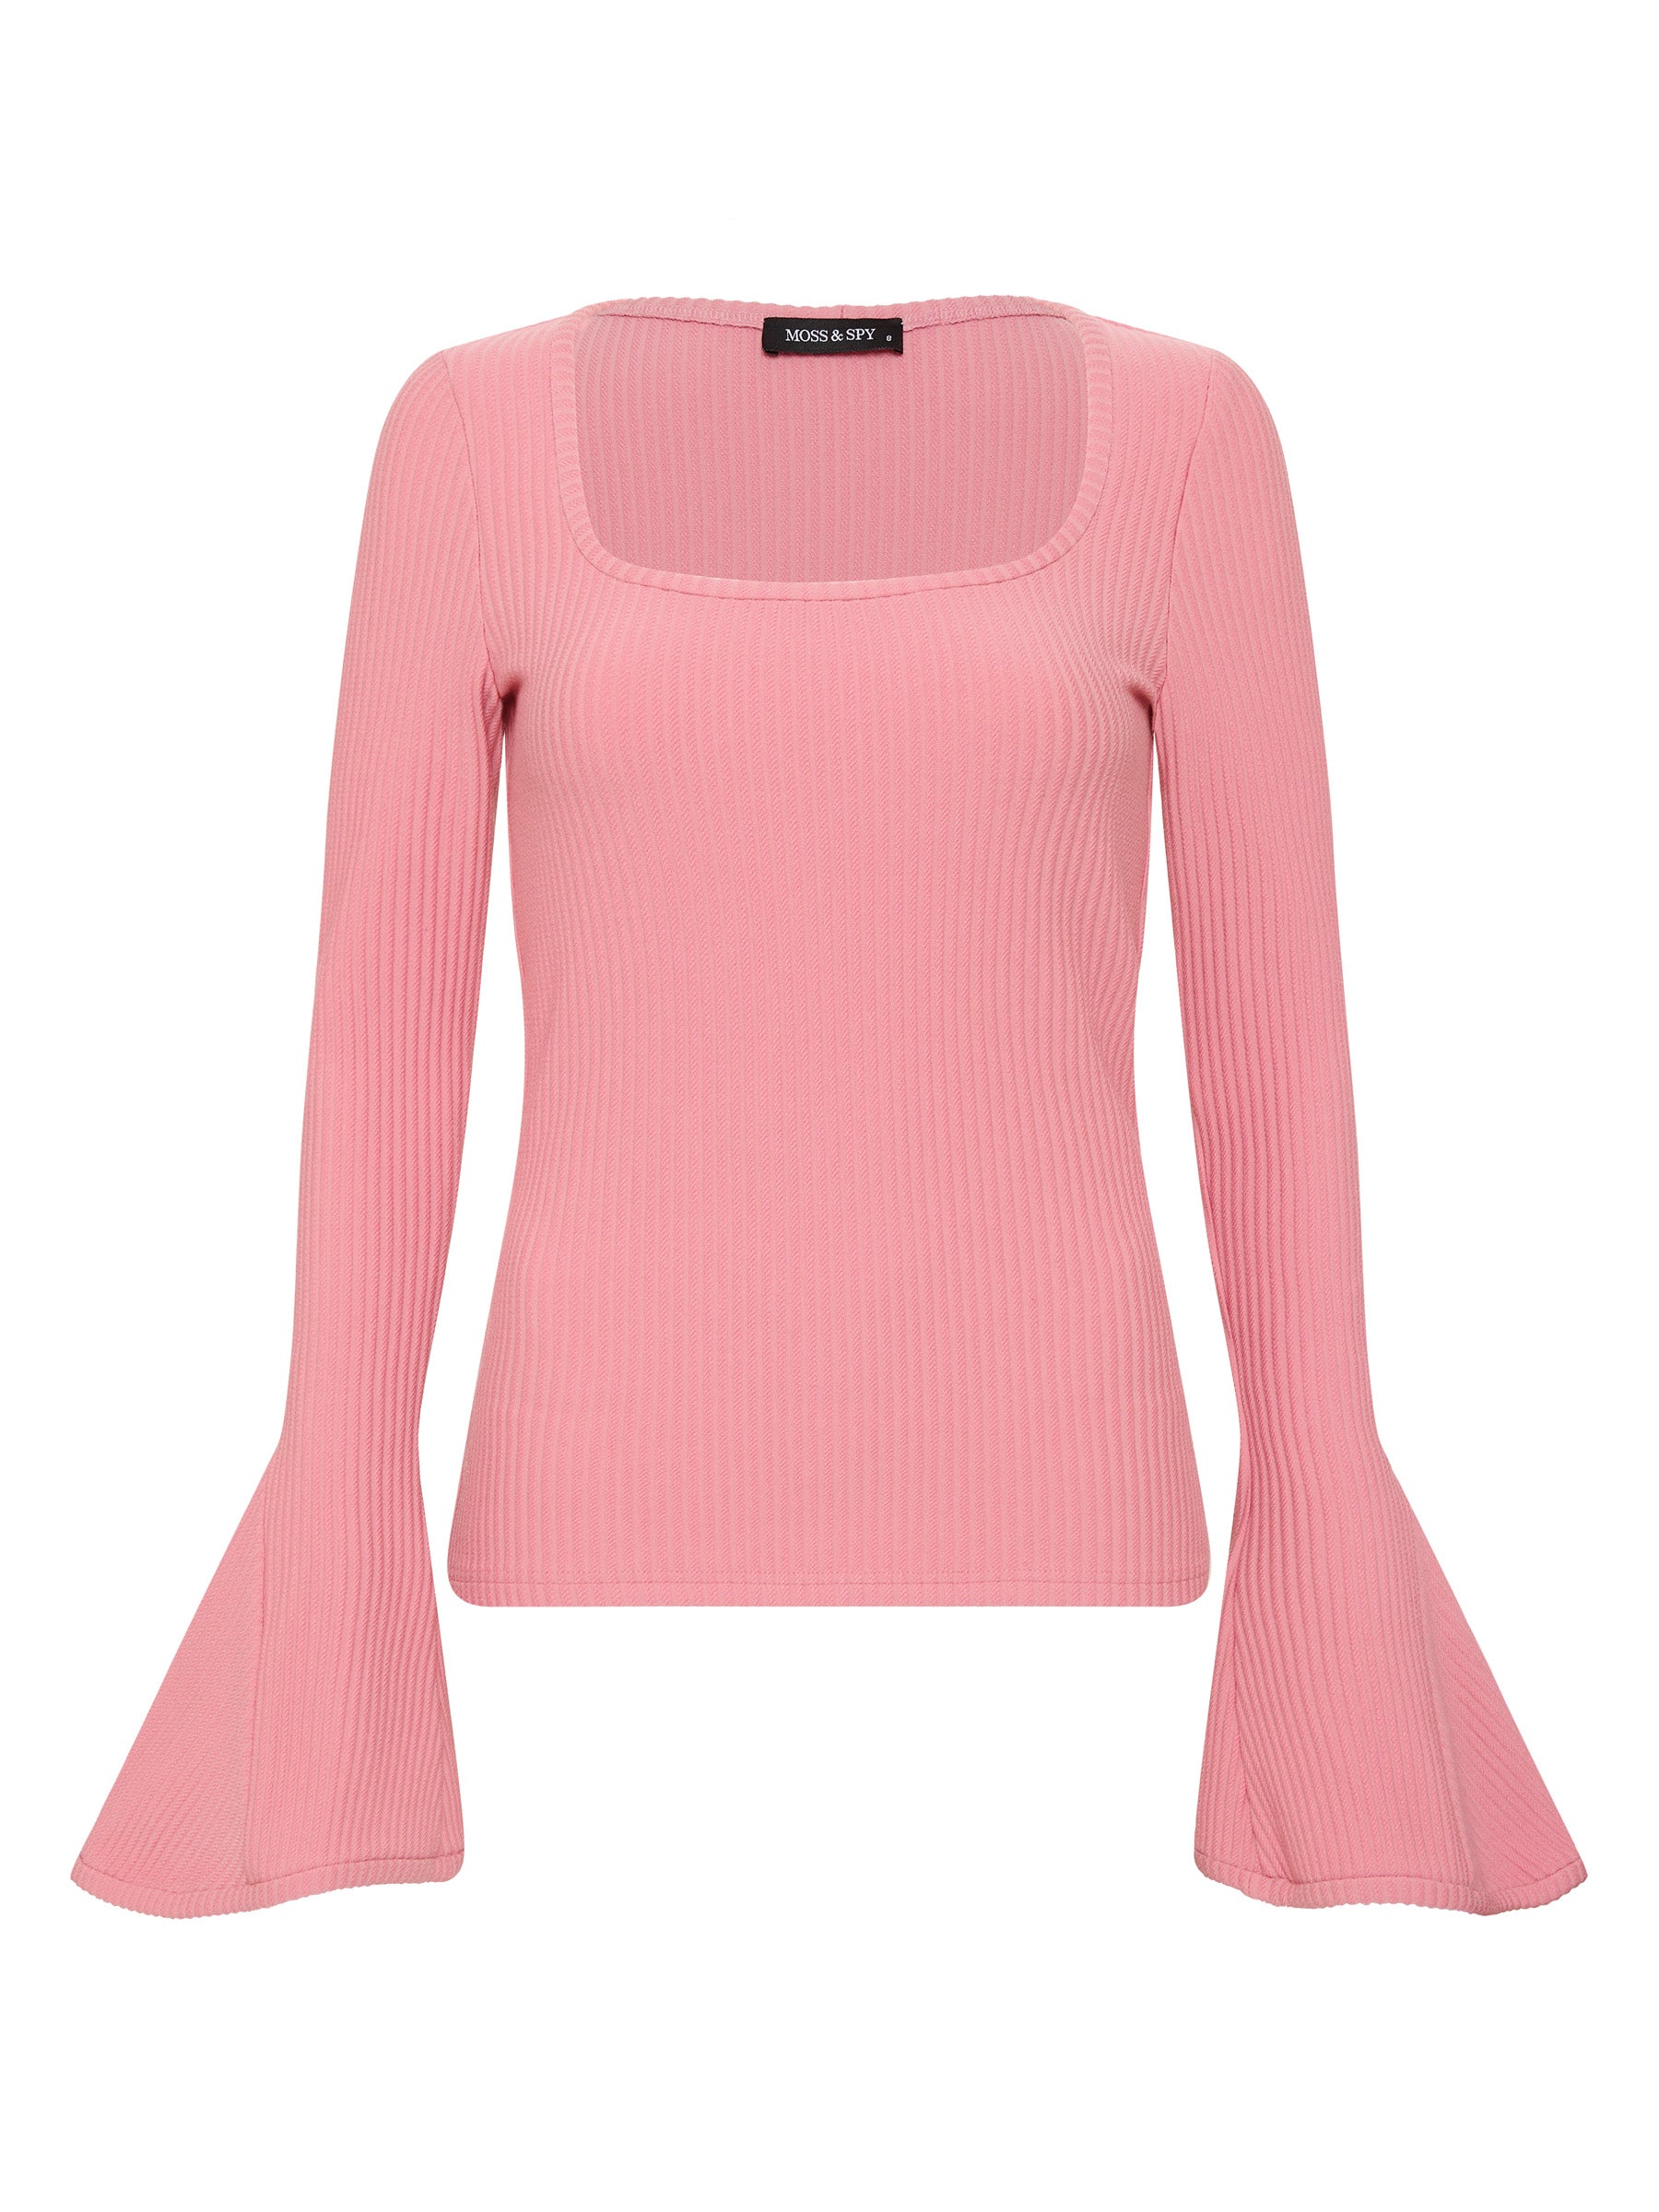 Becky Top - Pink (Size 14 Only)